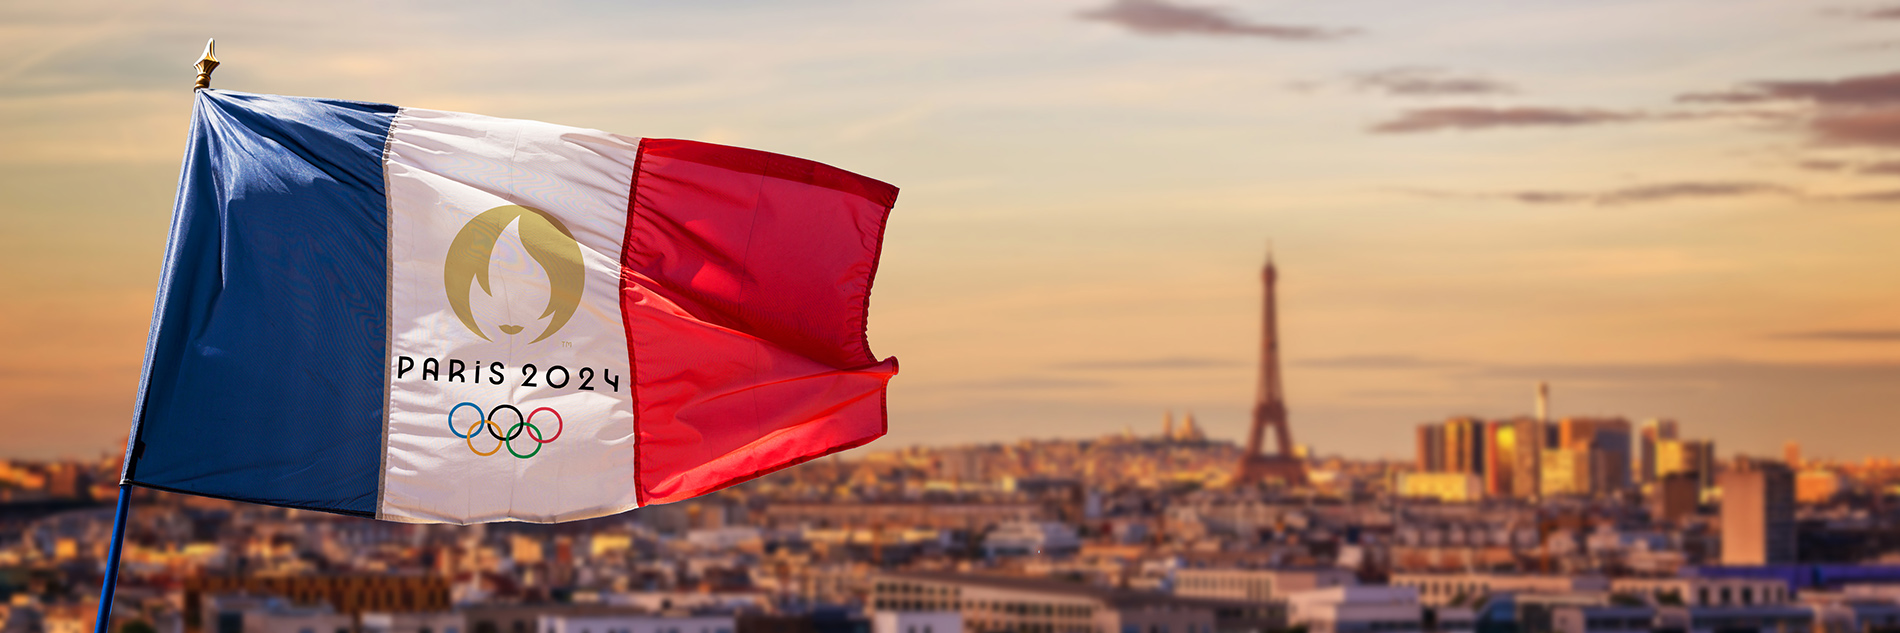 paris olympics flag - image courtesy of getty images